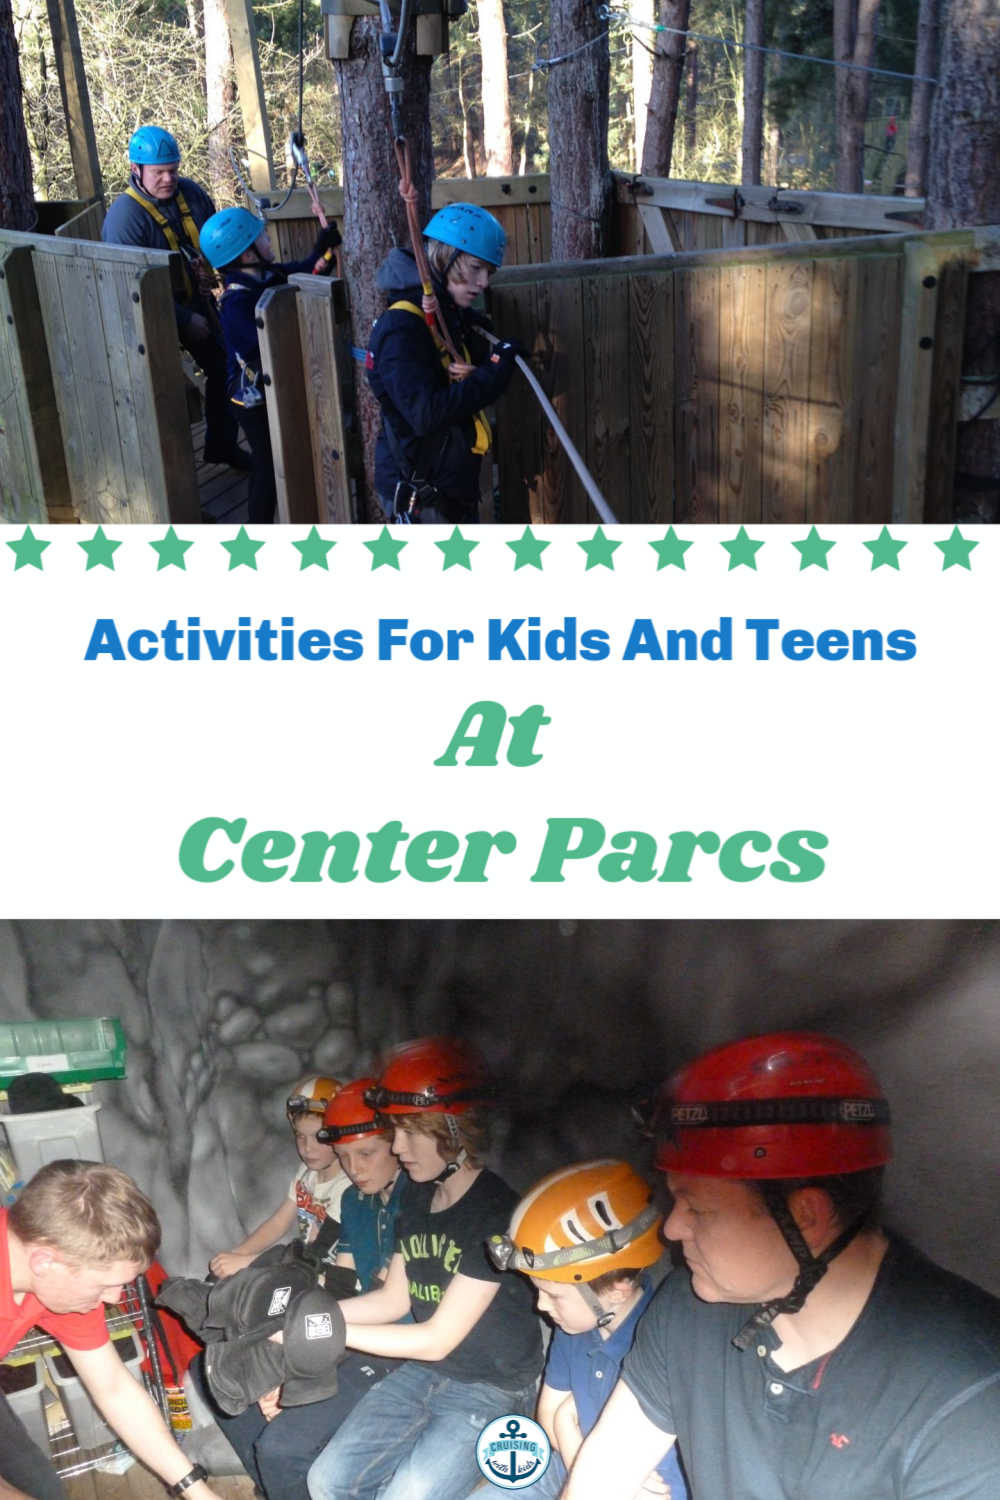 The ultimate guide to Activities For Kids, Teens And Families At Center Parcs